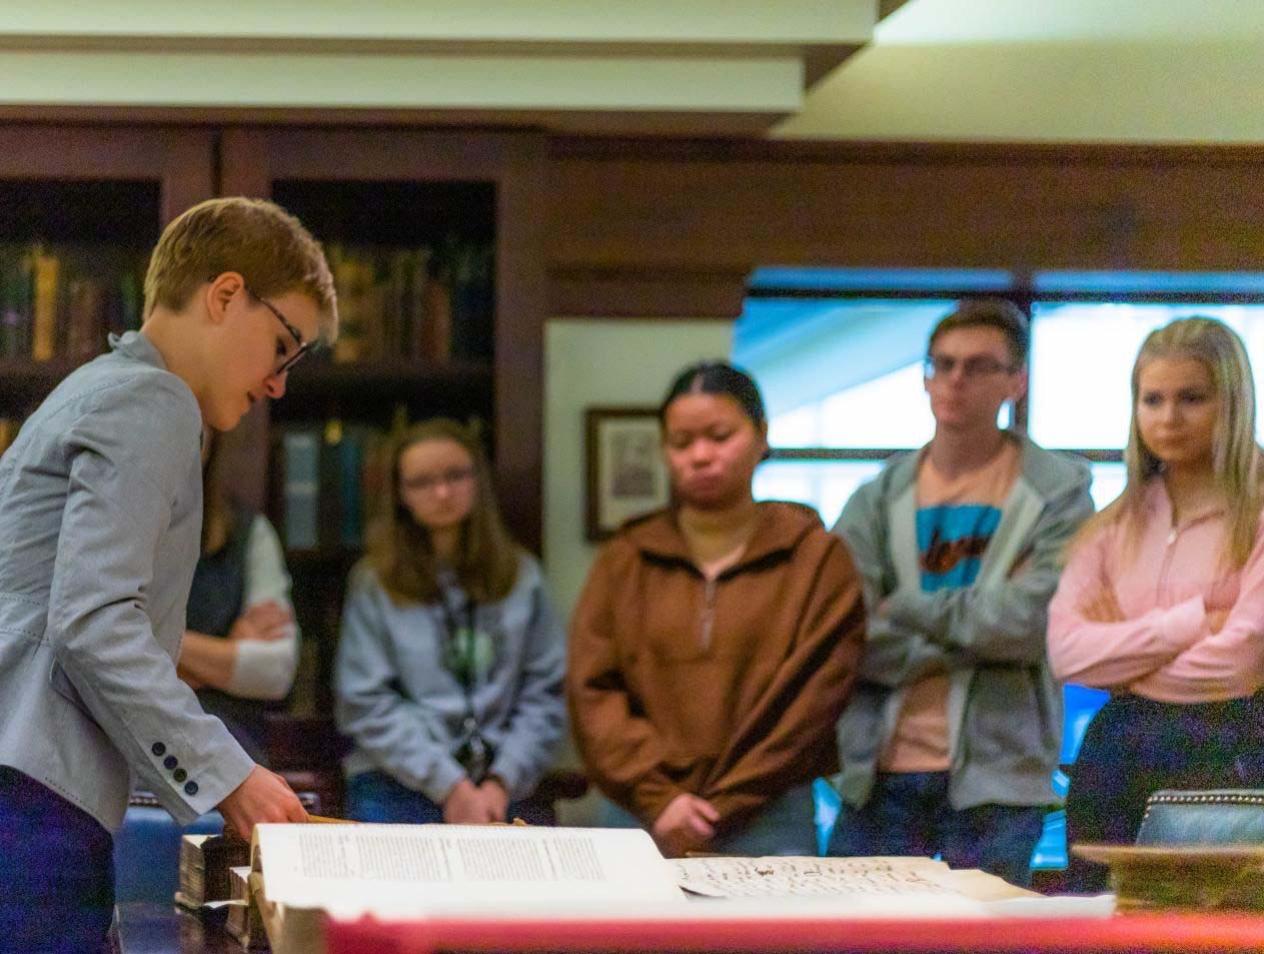 Dr. Ross shows students a rare book.